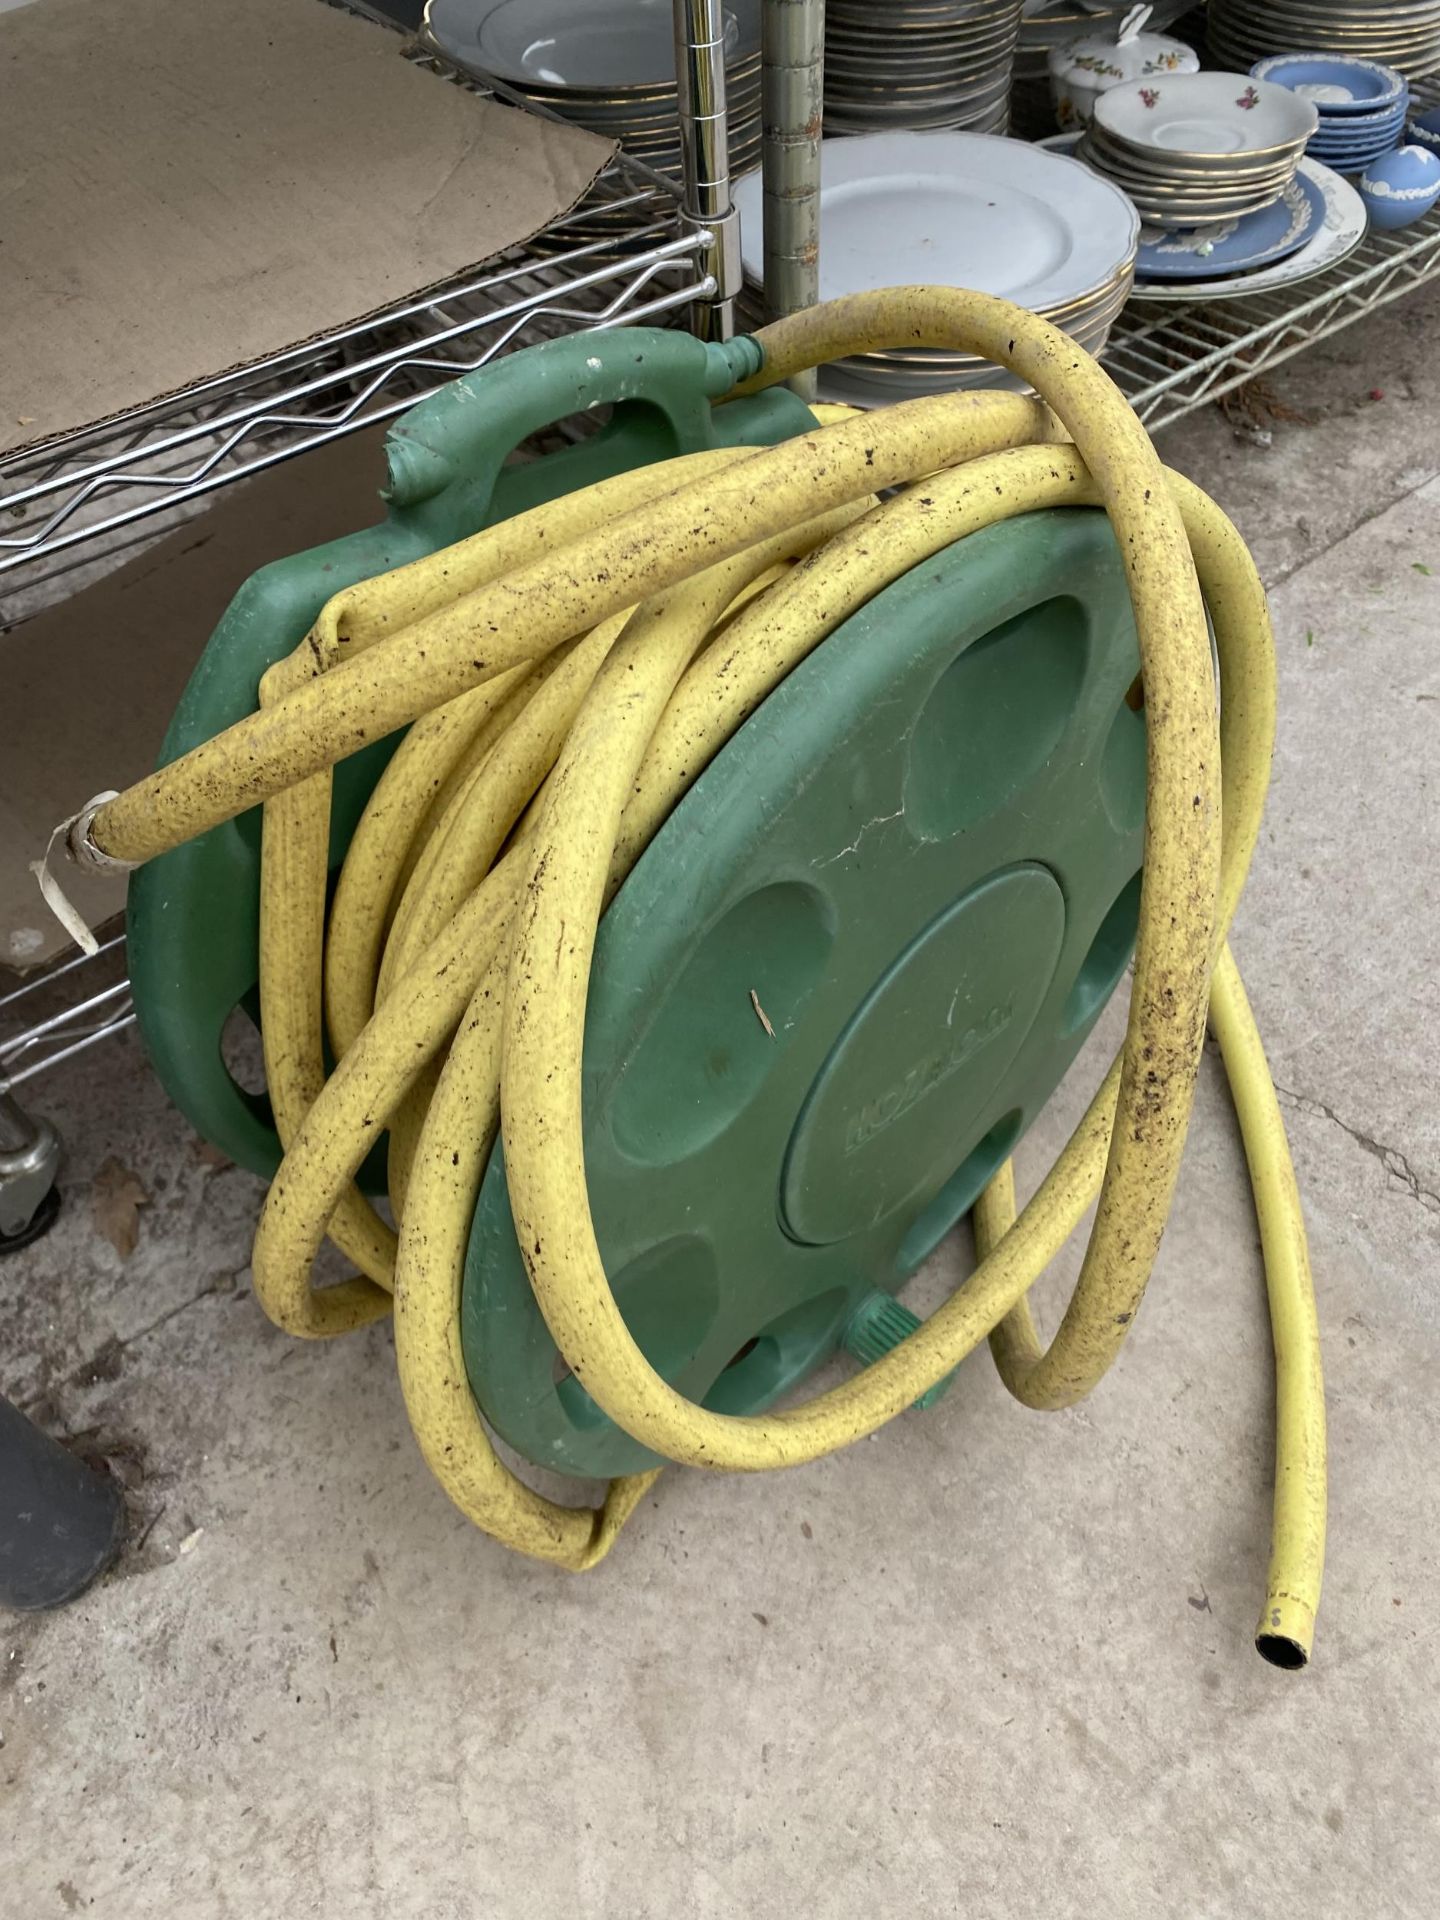 TWO GARDEN HOSE REELS - Image 3 of 3